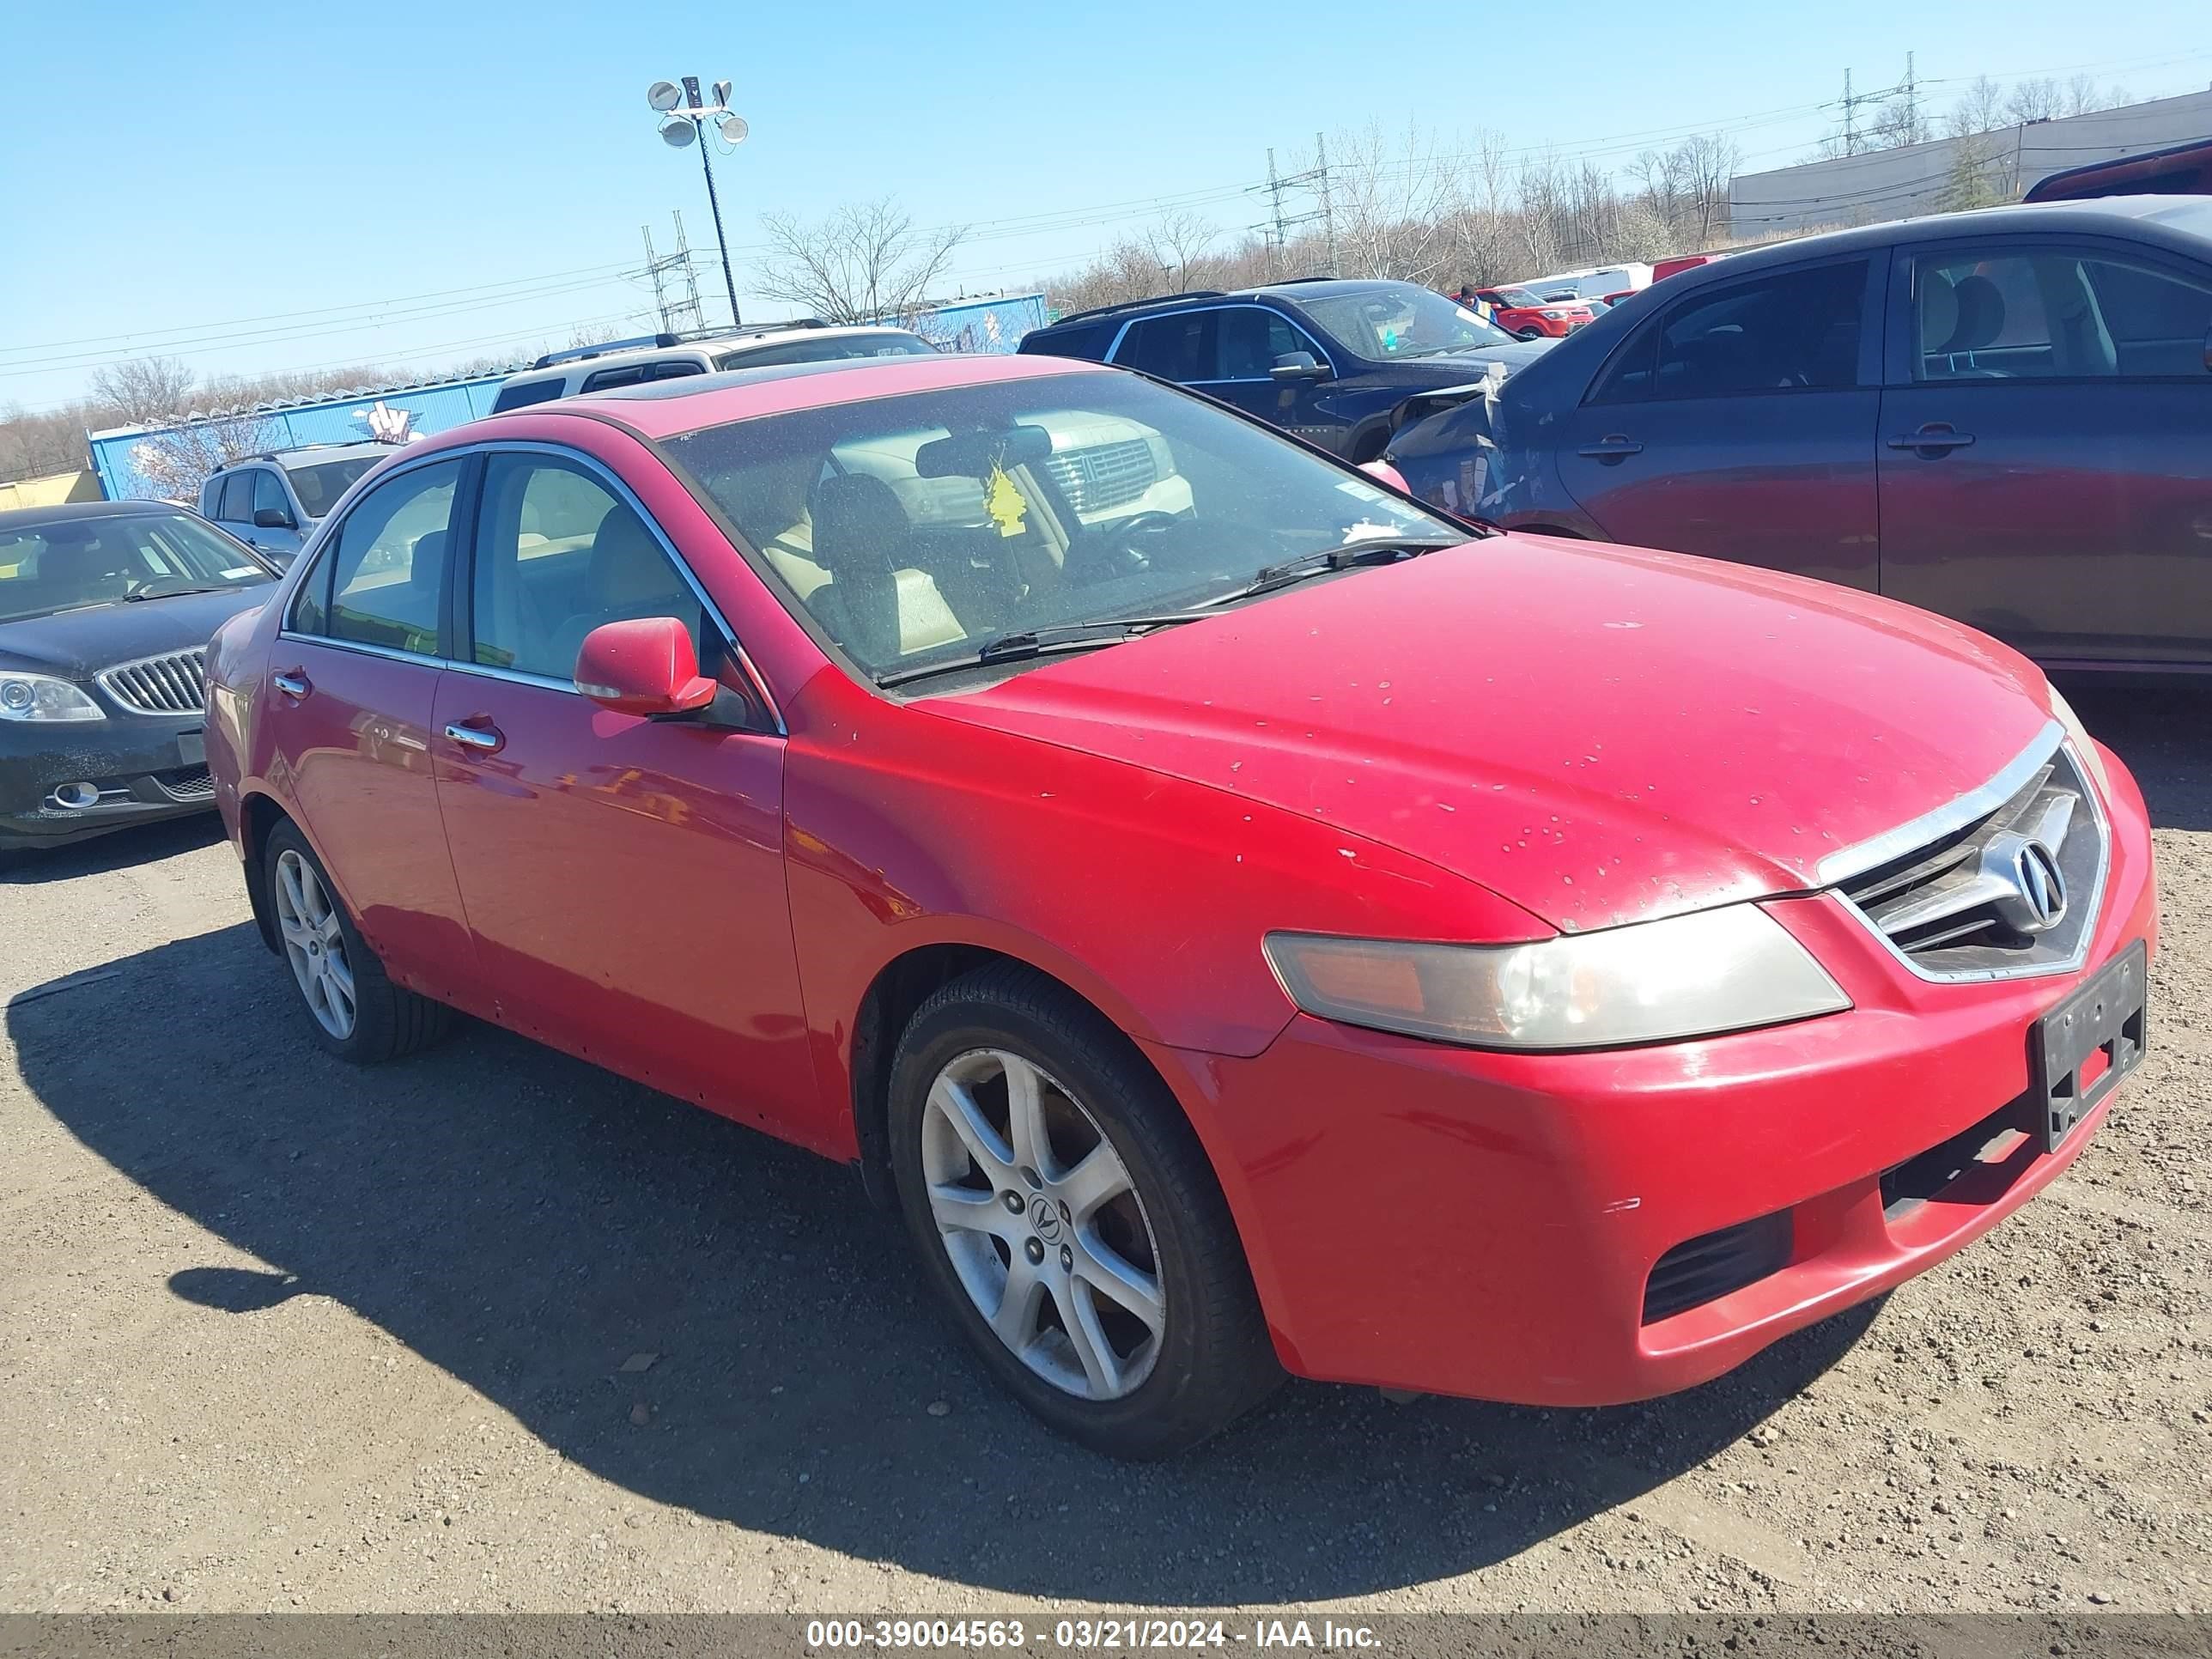 acura tsx 2004 jh4cl96864c014915